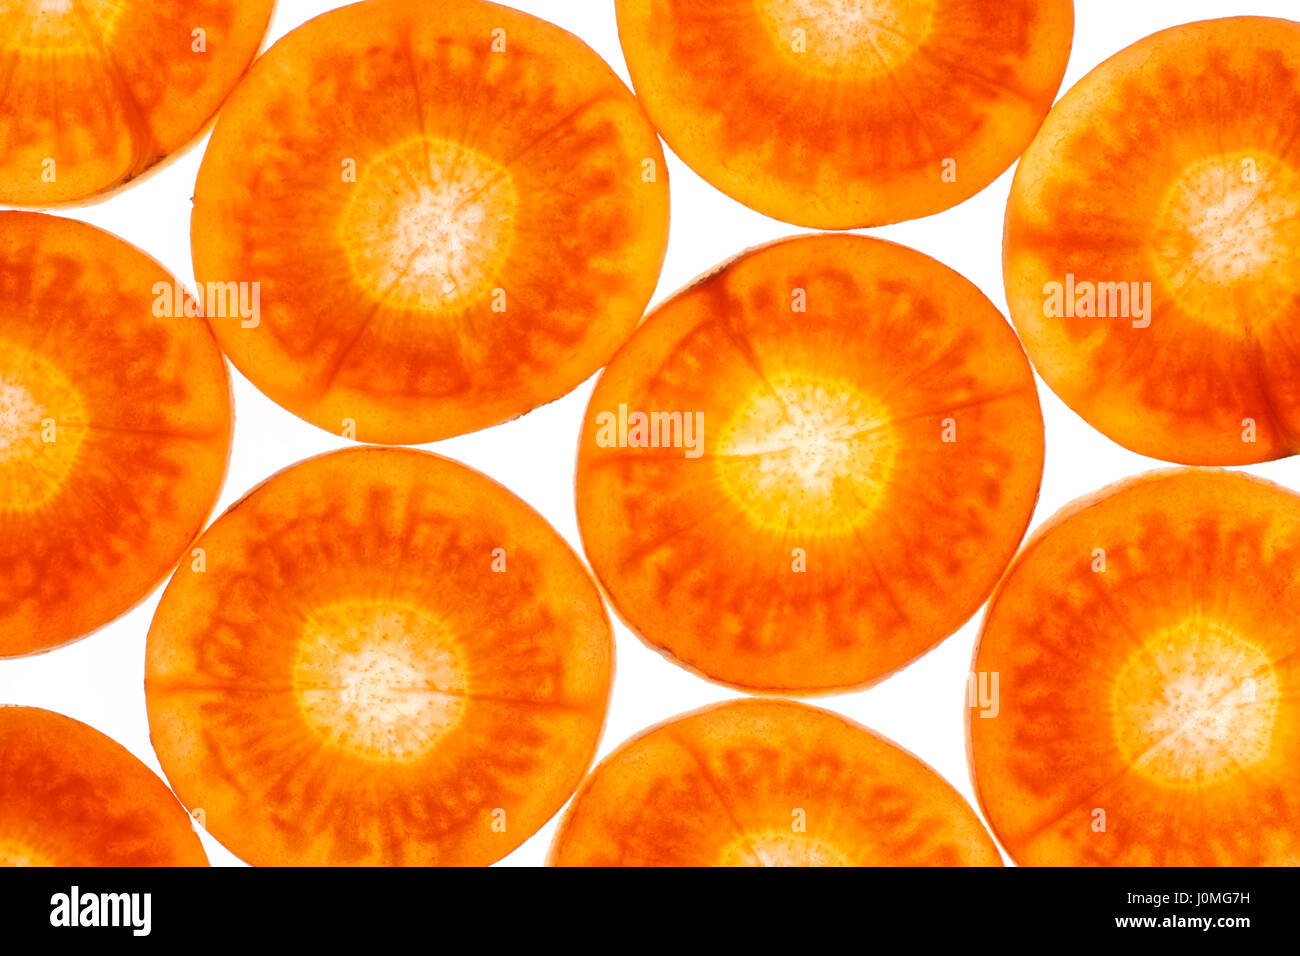 Carrot slices from above. Close up, full frame shoot. Stock Photo